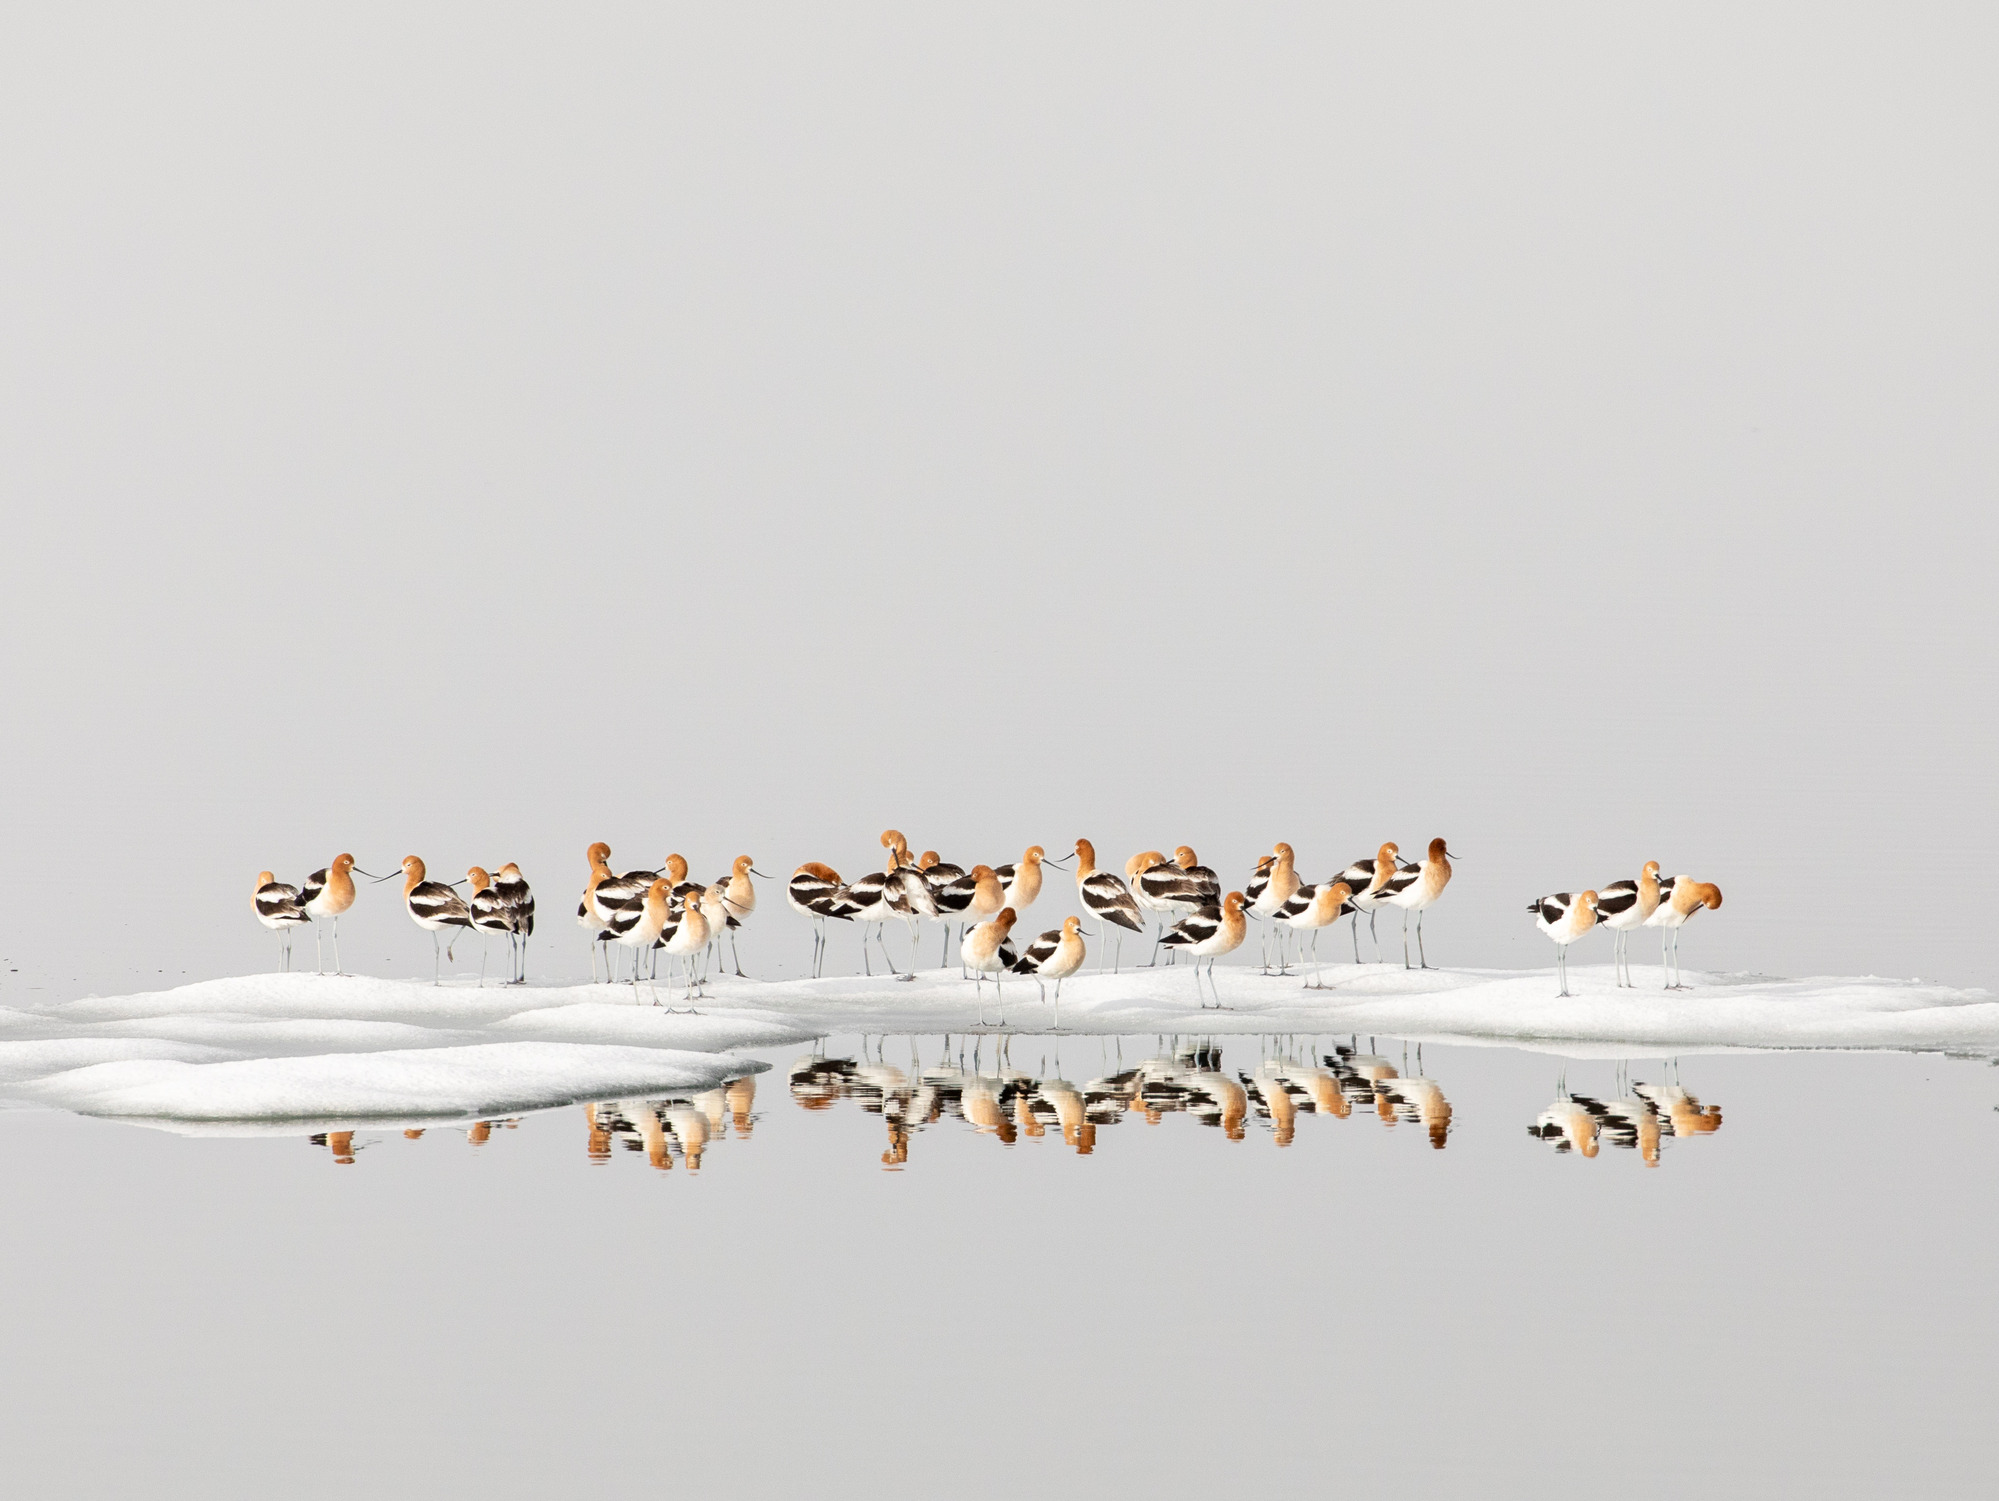 Brown, black and white birds stand in a flock on a piece of ice in water